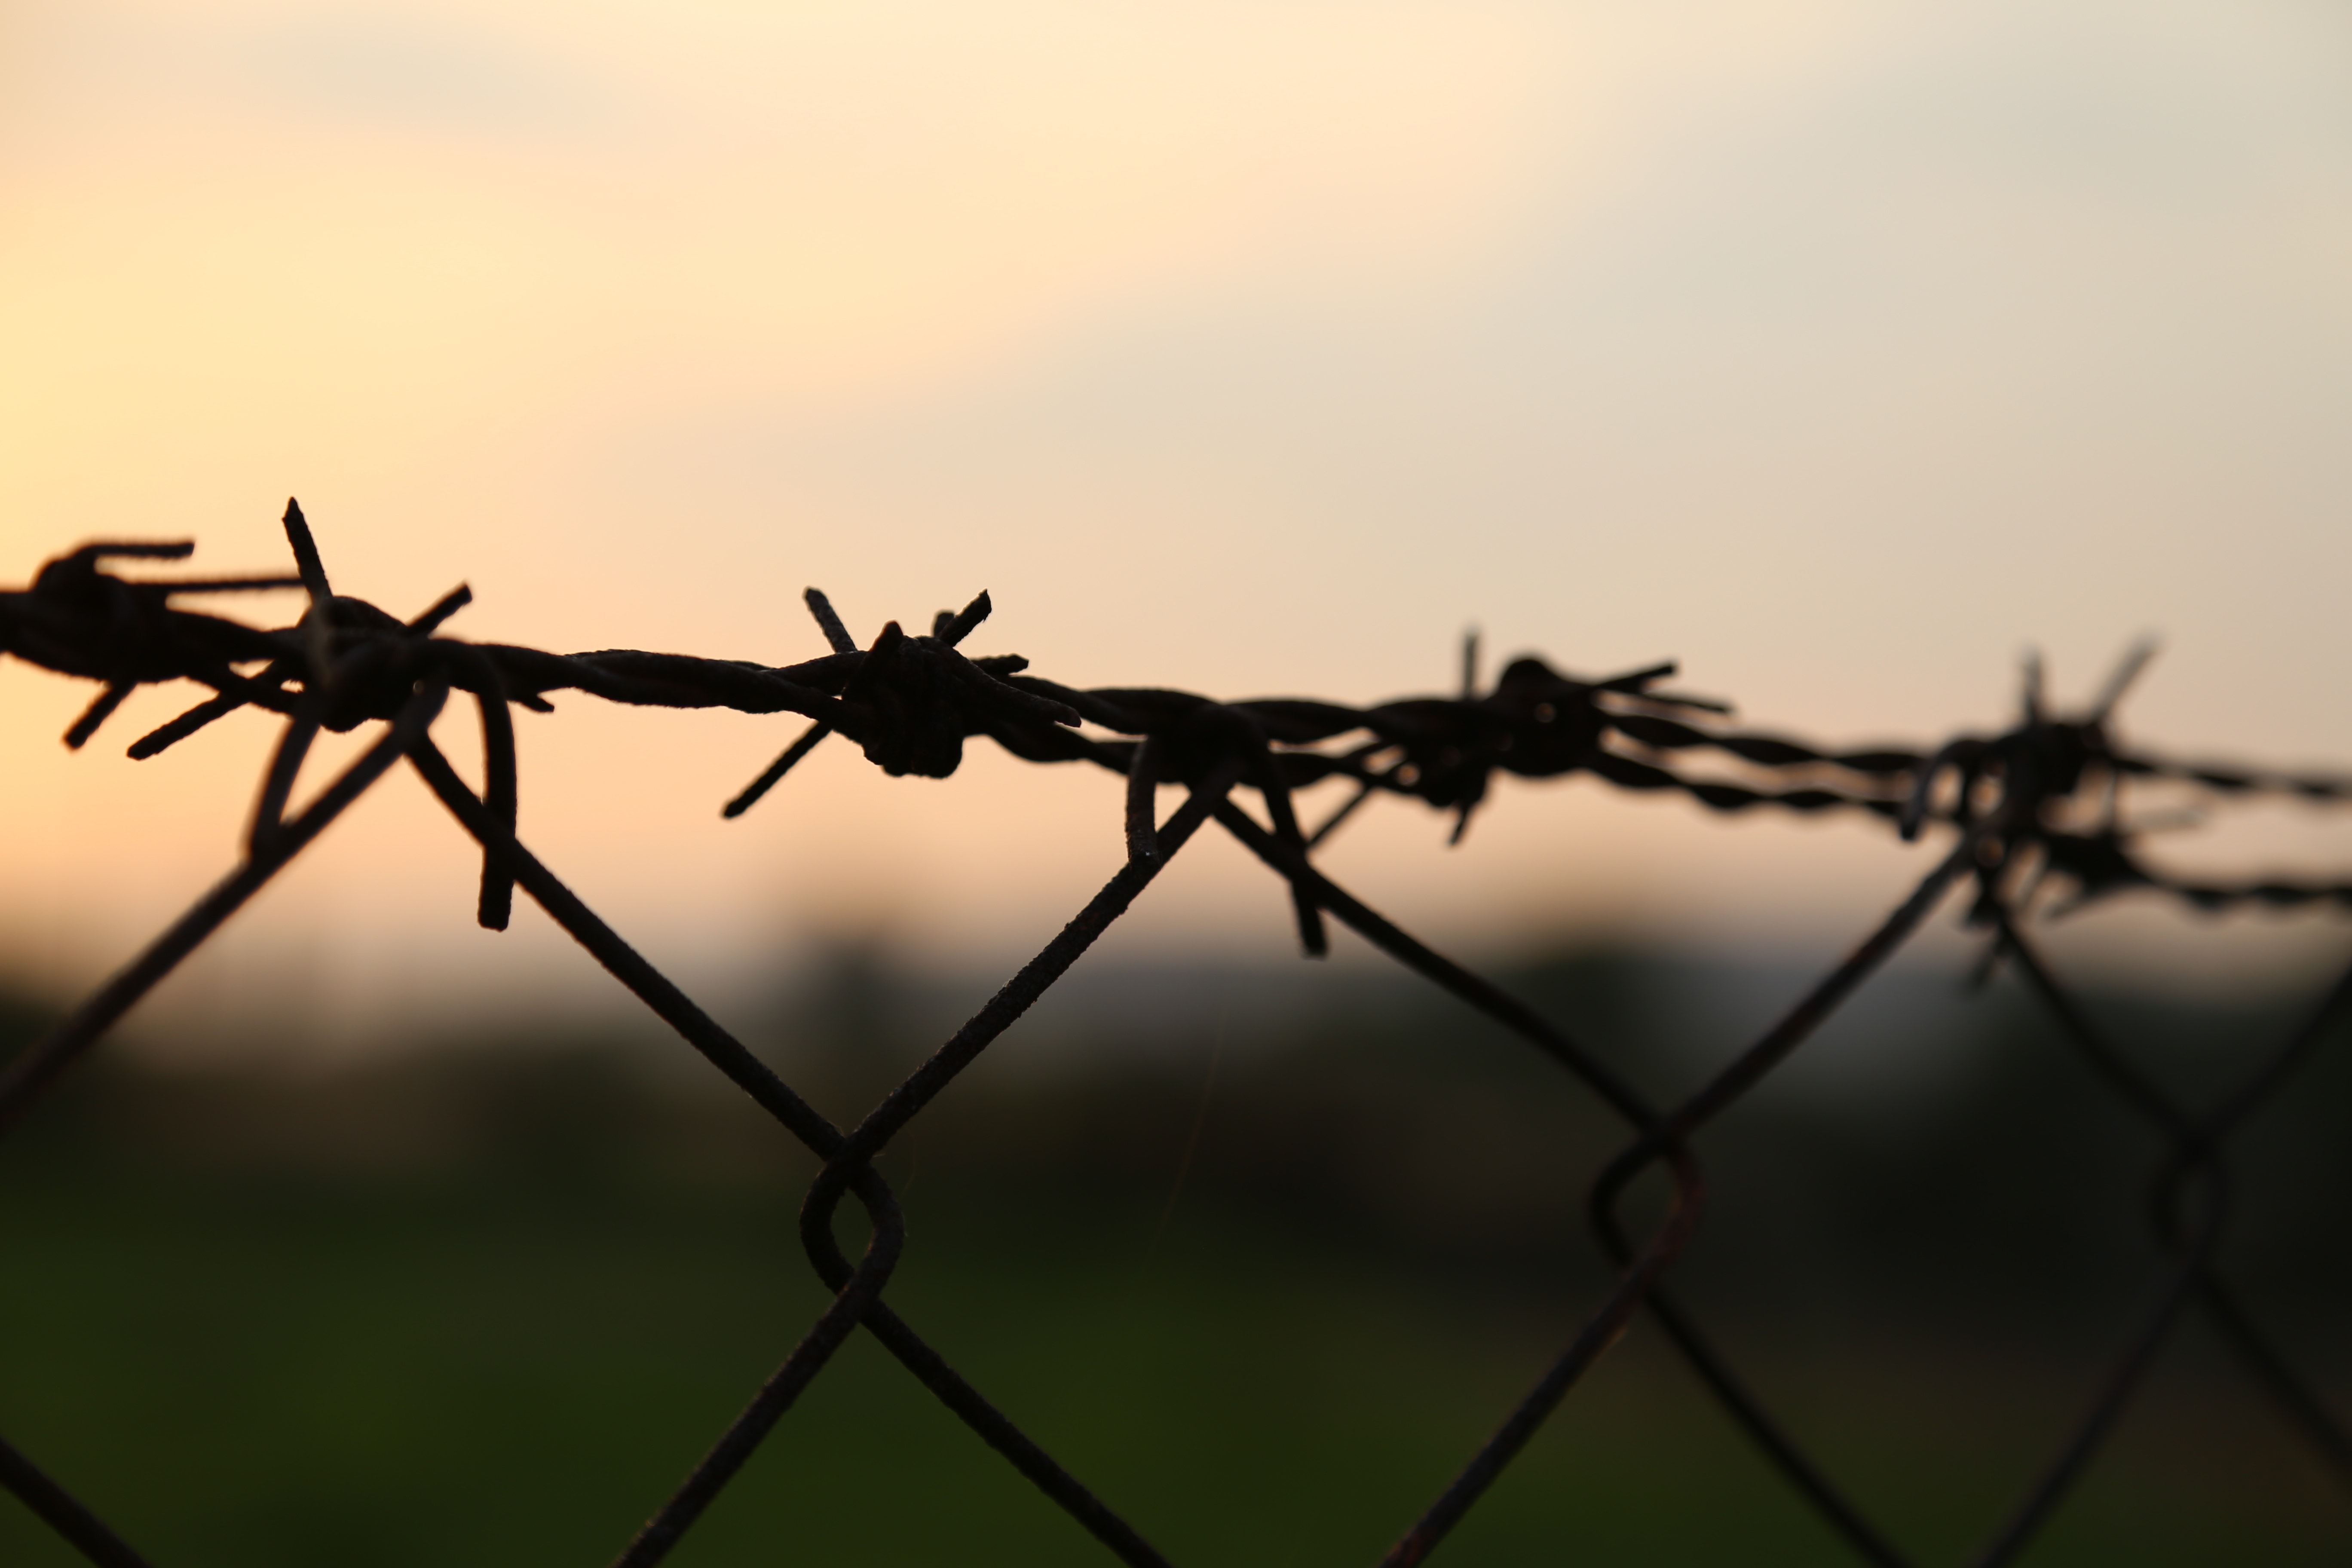 black barb wire and chain link fence